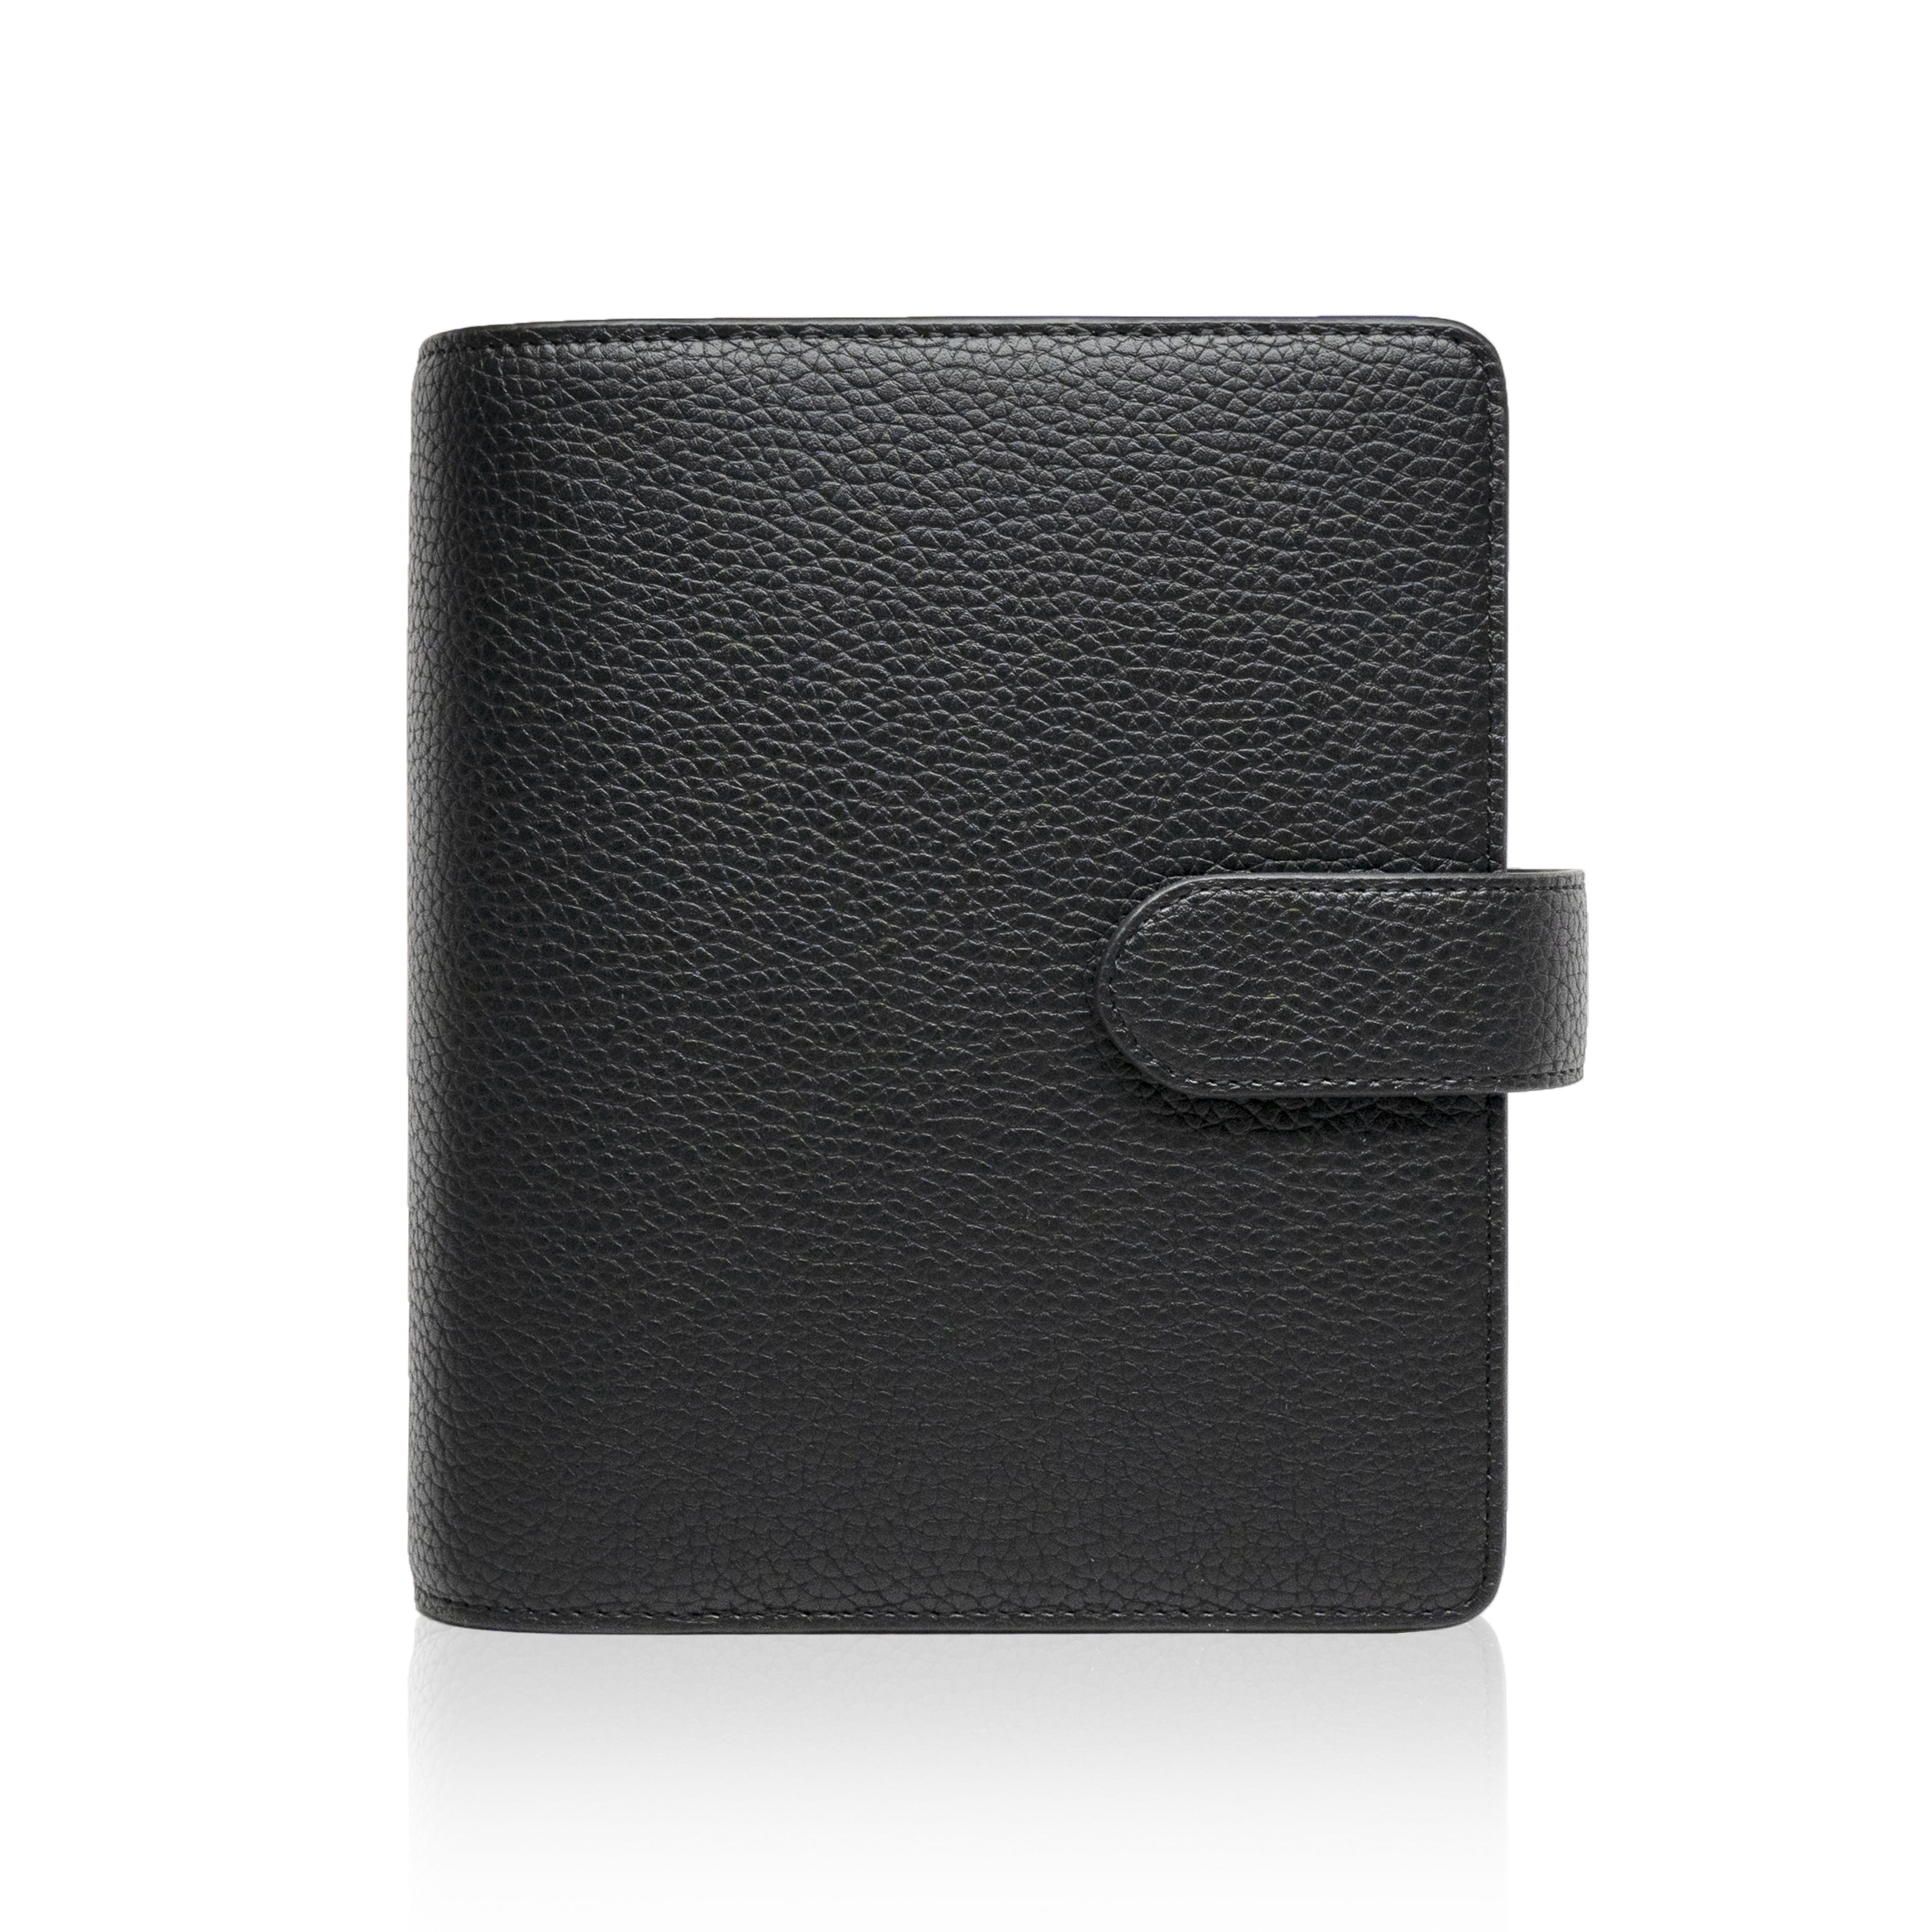 Two-Tone Pocket Black Pebble Leather Ring Organizer with Krause